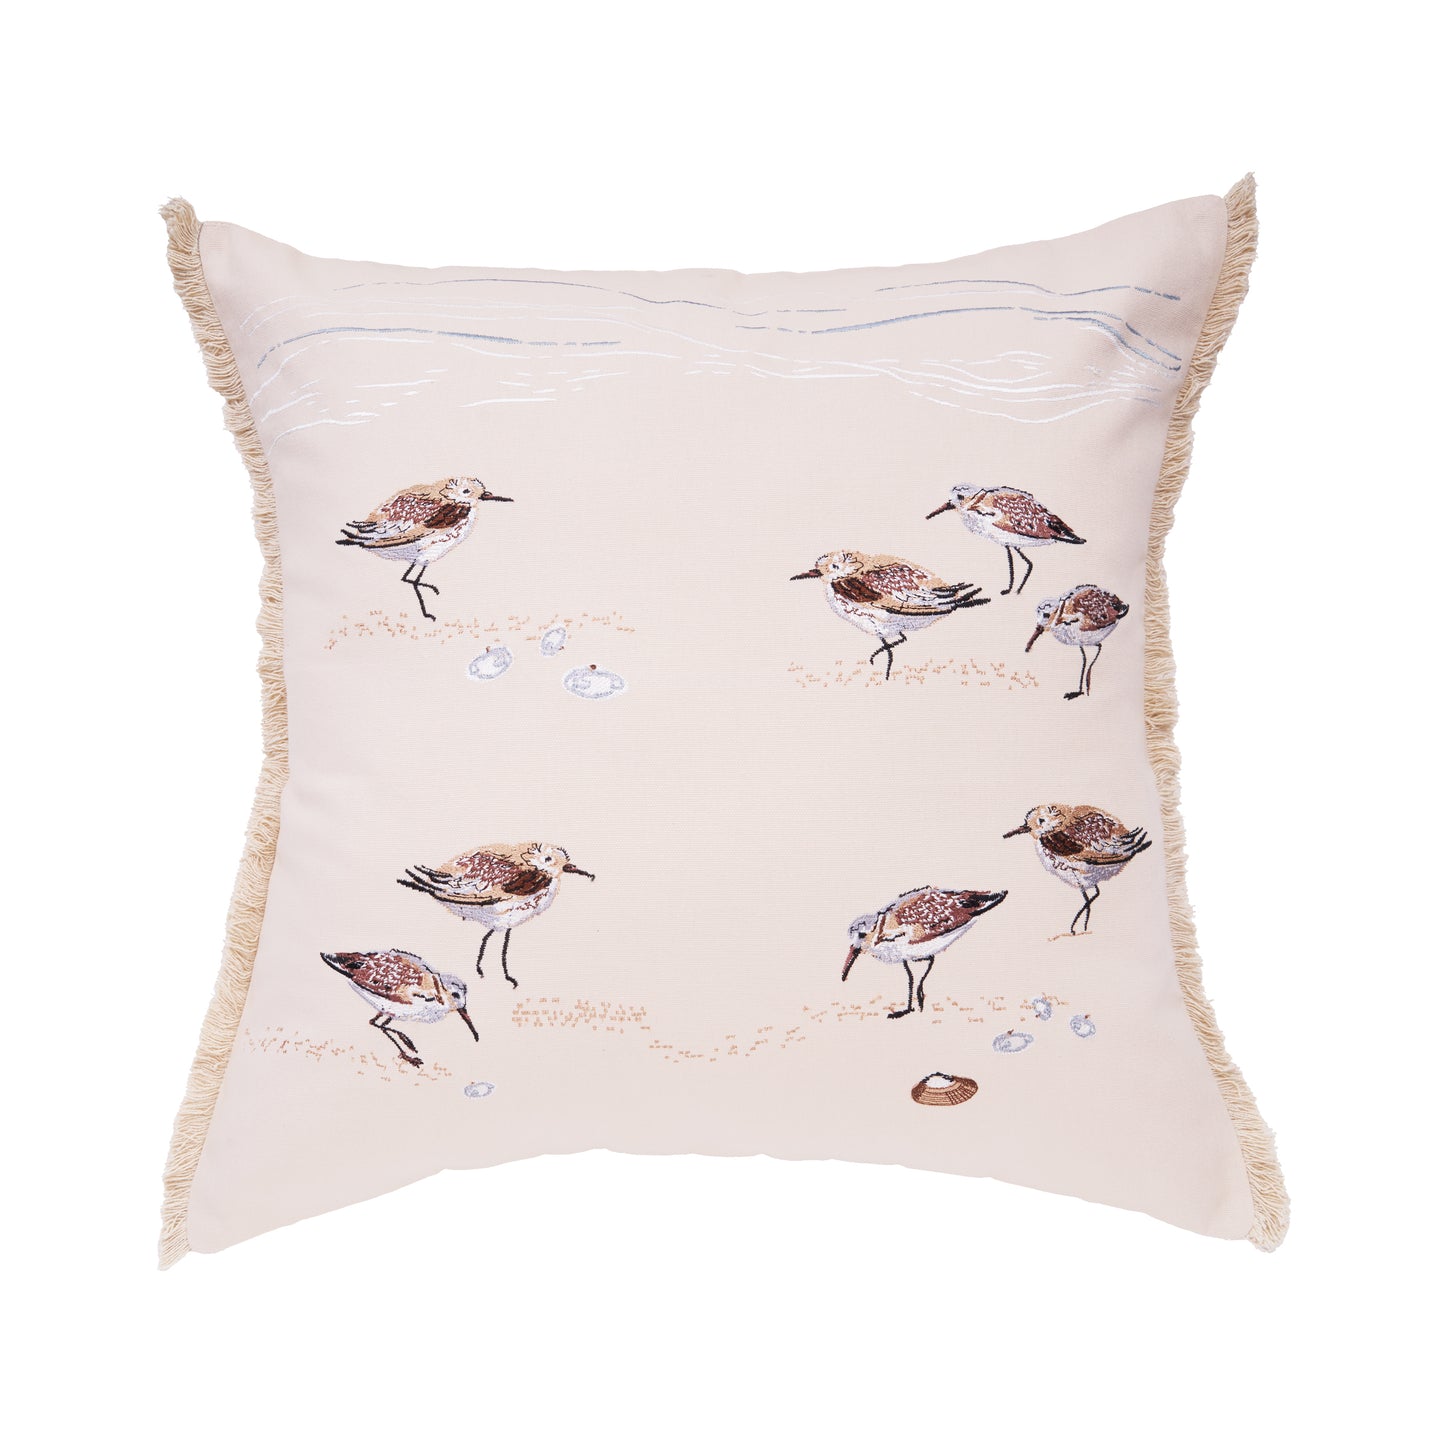 Embroidered sandpipers on an indoor pillow